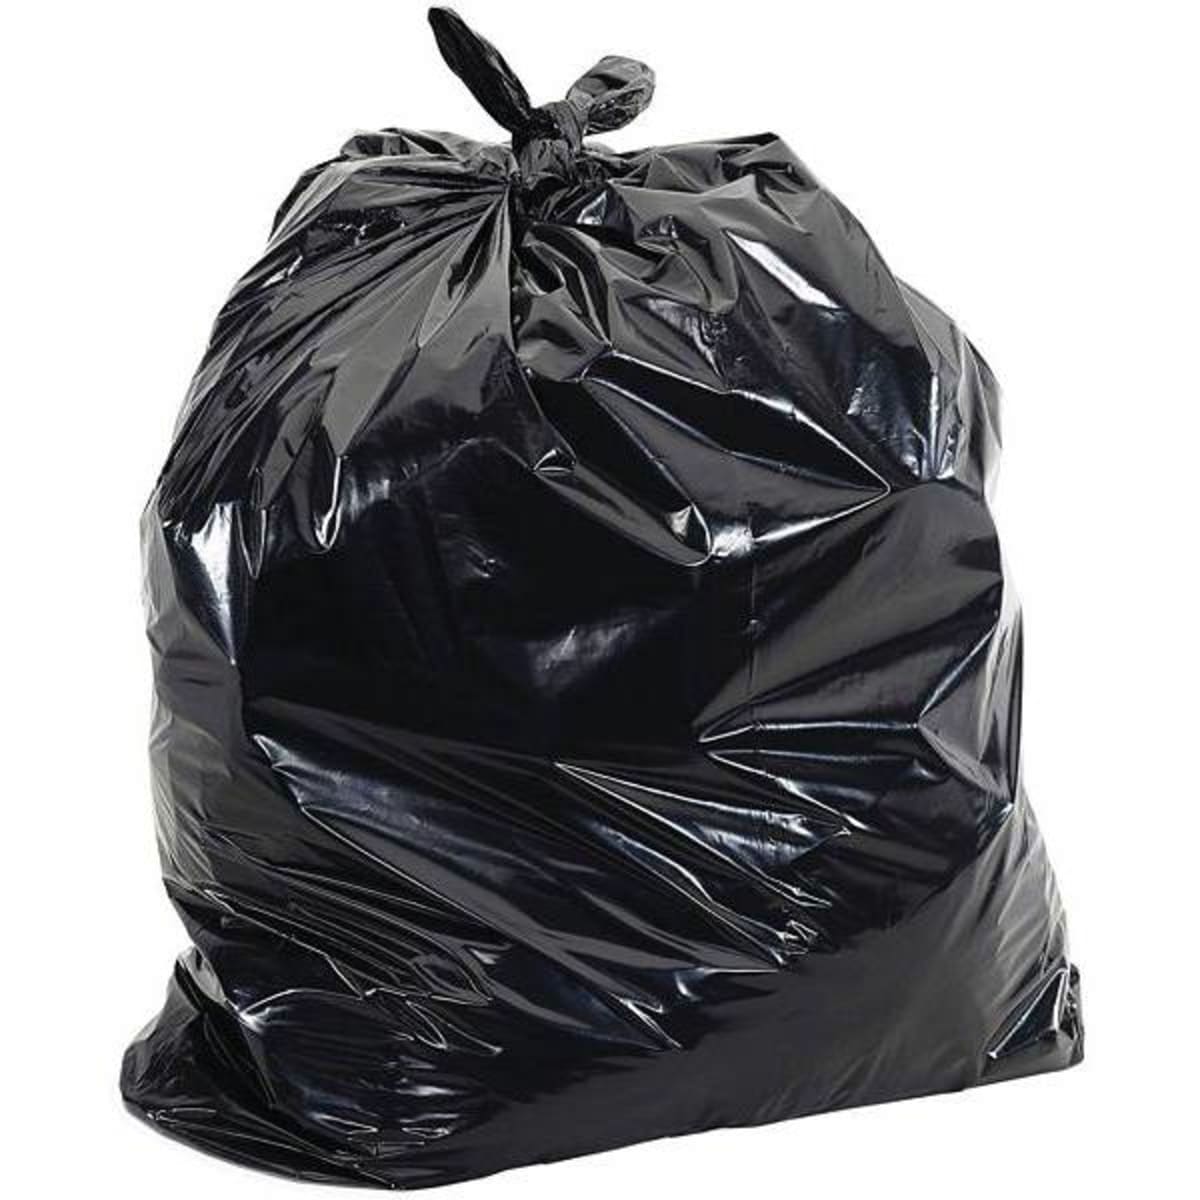 65 Gallon Garbage Bags: Clear 1.5 Mil 50x48 50 Bags.